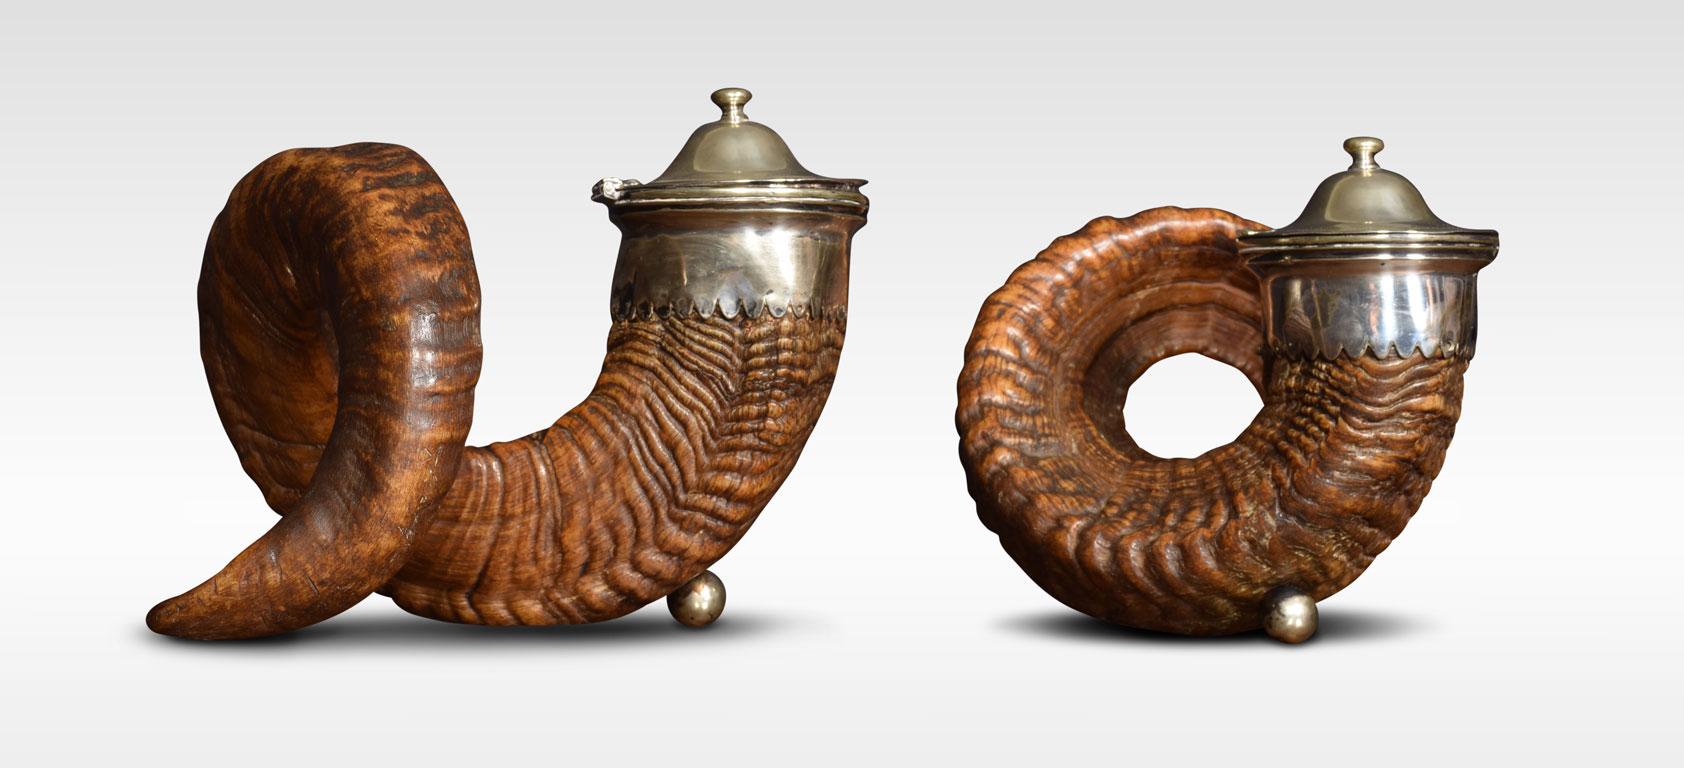 A pair of 19th century ram’s horn snuff mulls, with electroplate mounts and hinged lids.
Dimensions:
Height 8 inches
Width 8.5 inches
Depth 9 inches.